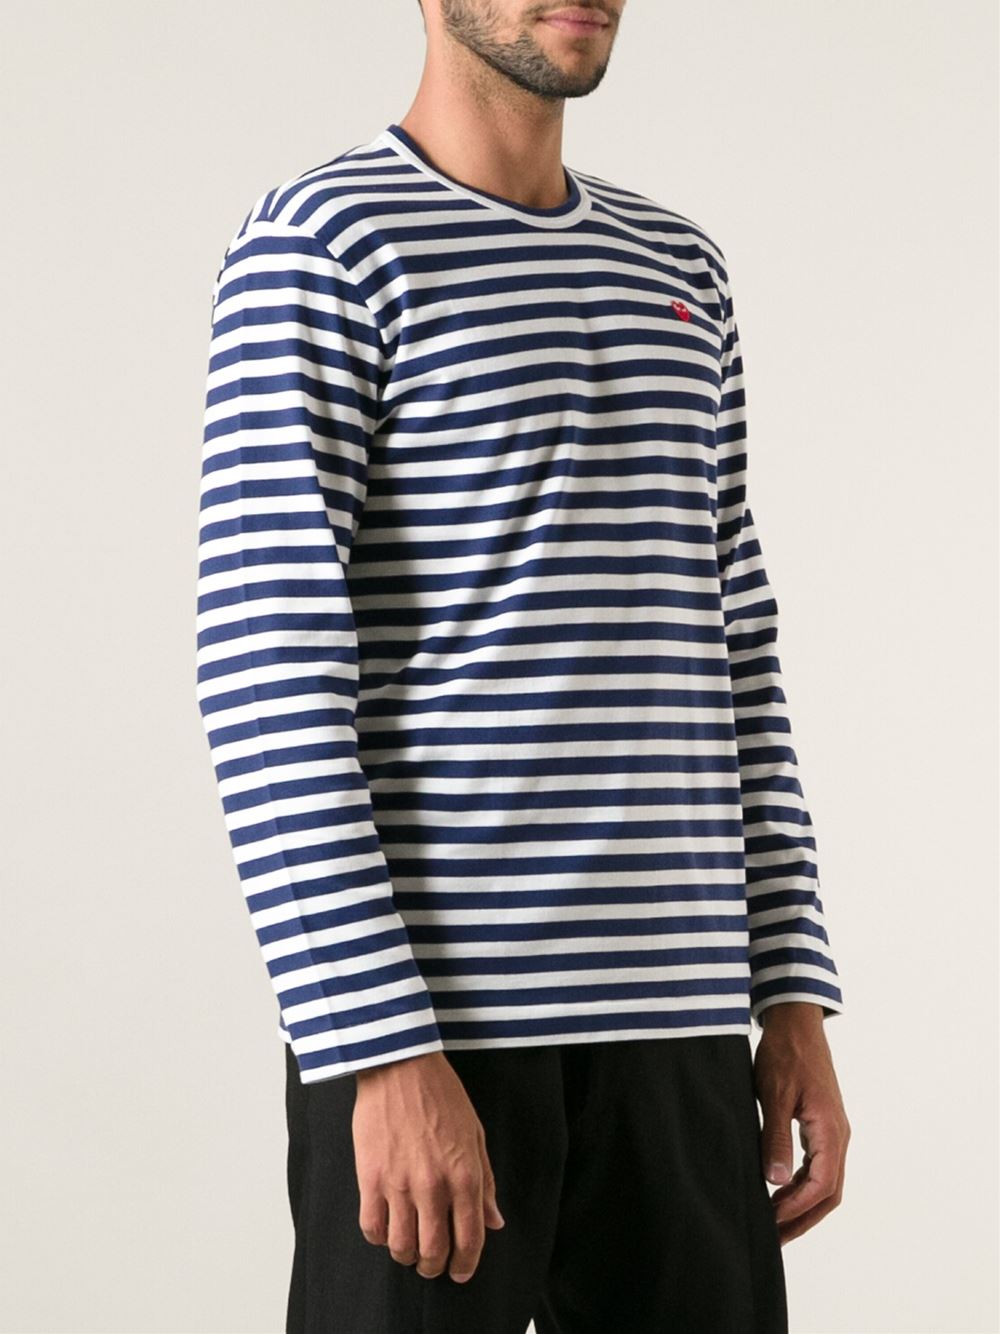 Get the look: A$ap Rocky & Ian Connor in stripes – PAUSE Online | Men's ...